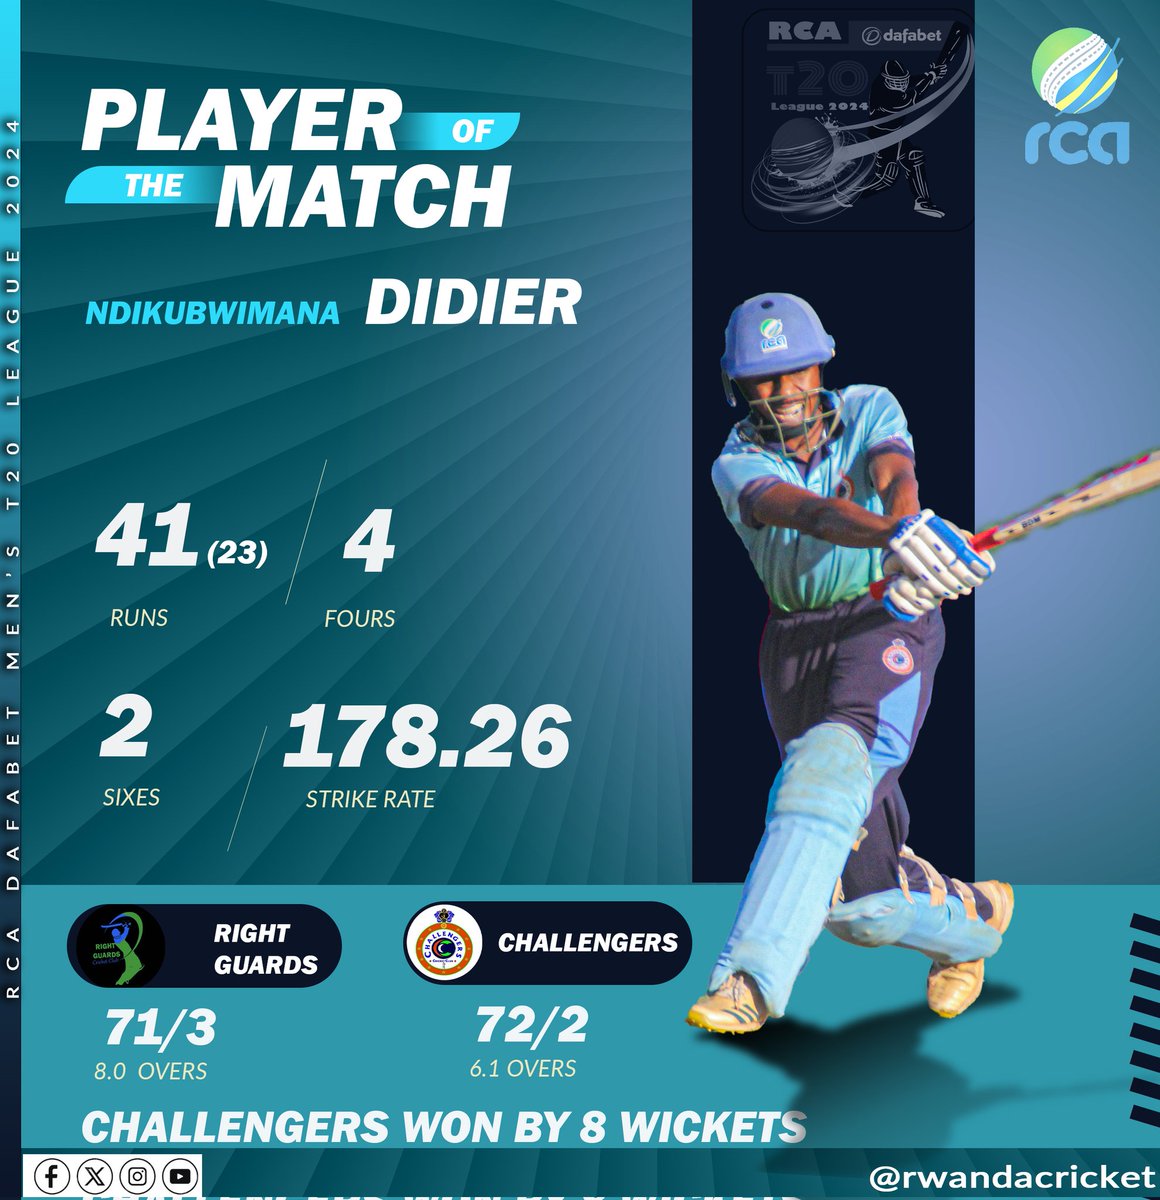 Yesterday, in the RCA dafabet men's T20 game that was reduced to 8 overs, each side challengers CC beat Right guards by 8 wickets with Didier Ndikubwimana scoring 41 runs off 23 balls to claim the player of the match award.